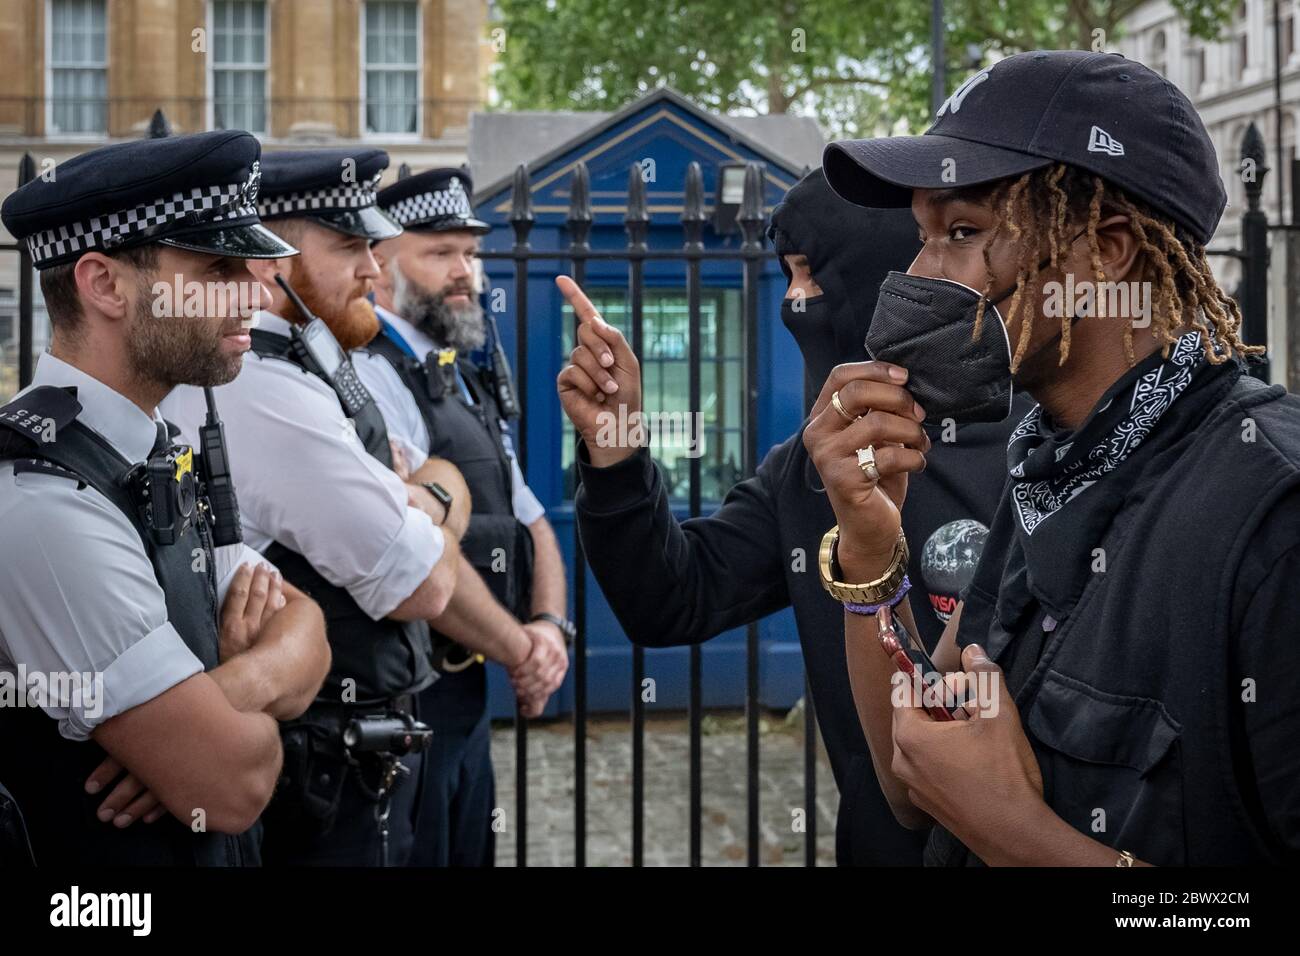 Black Lives Matter (BLM) activists and supporters angrily confront police in Westminster following the death of George Floyd, a black man, who died in police custody on 25th May in Minneapolis. London, UK. Stock Photo